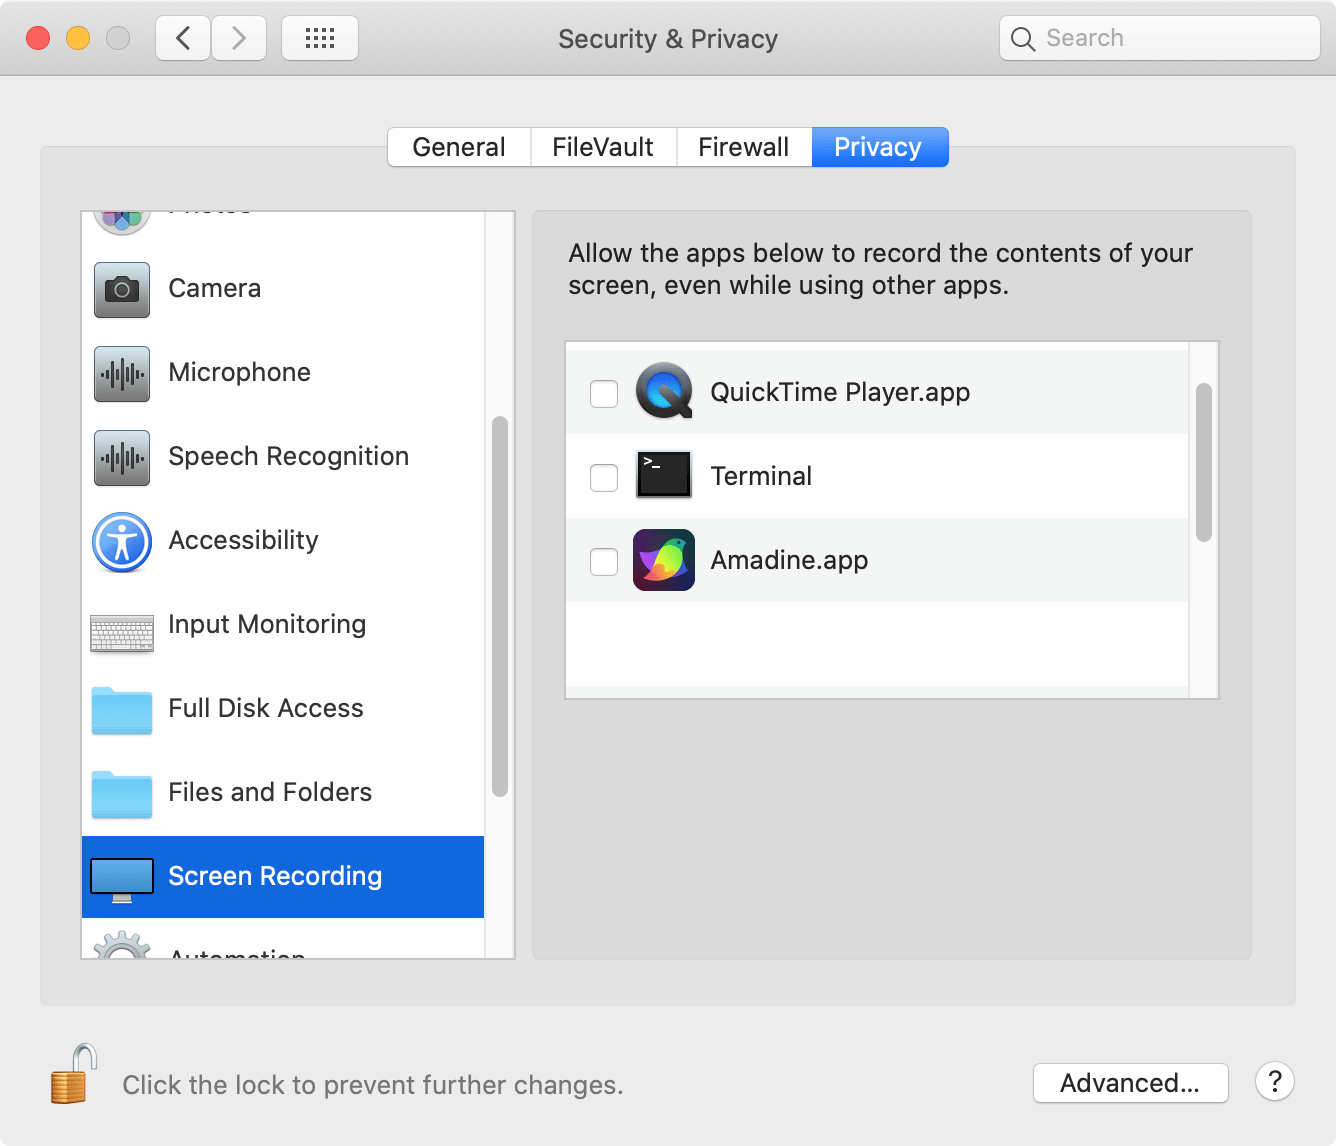 The Screen Recording section in the Security & Privacy settings.